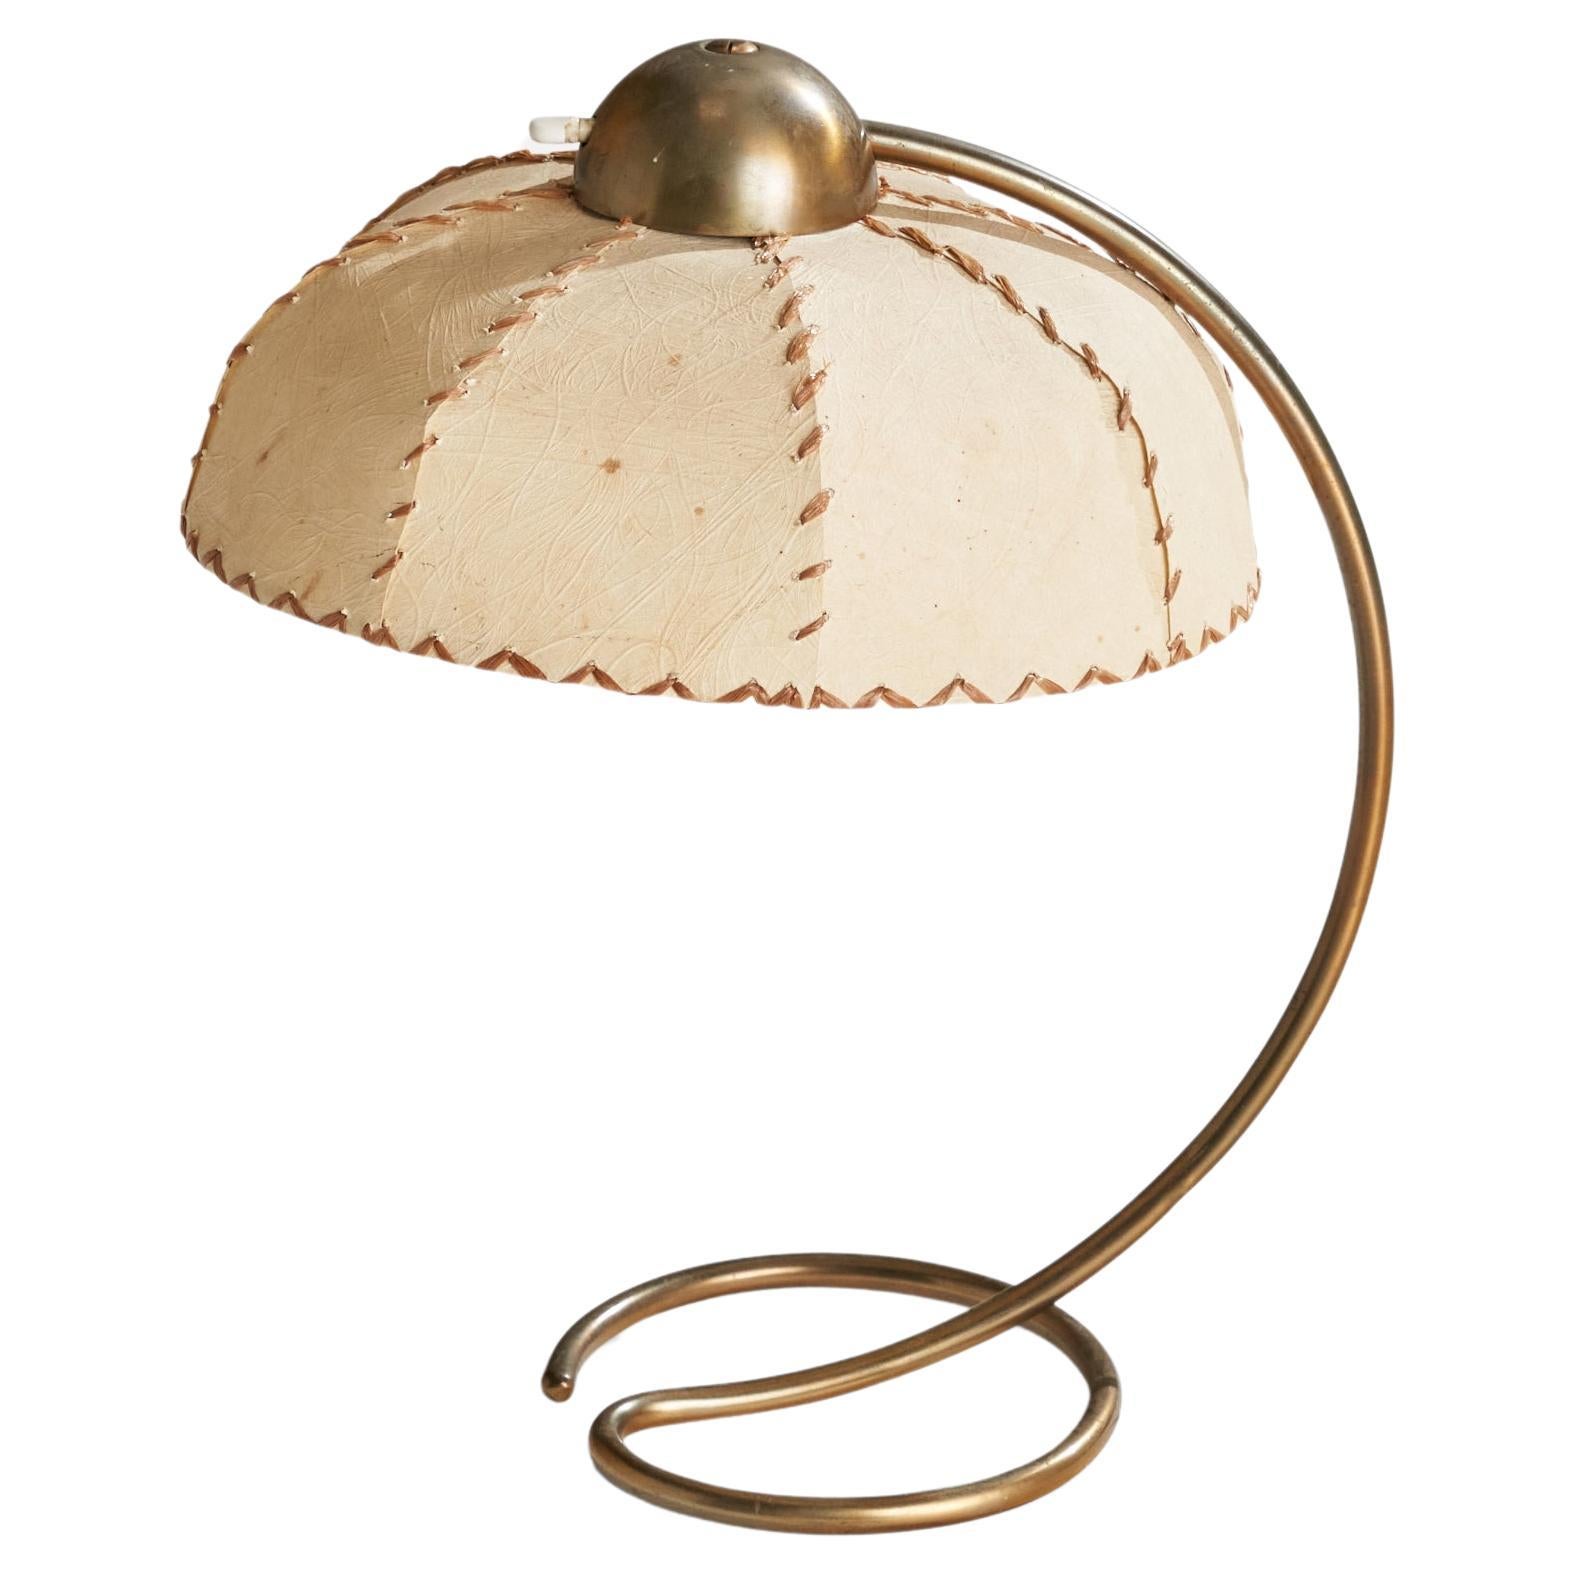 Karl Trabert, Diffuna Table Lamp, Brass, Parchment Paper, Germany 1930